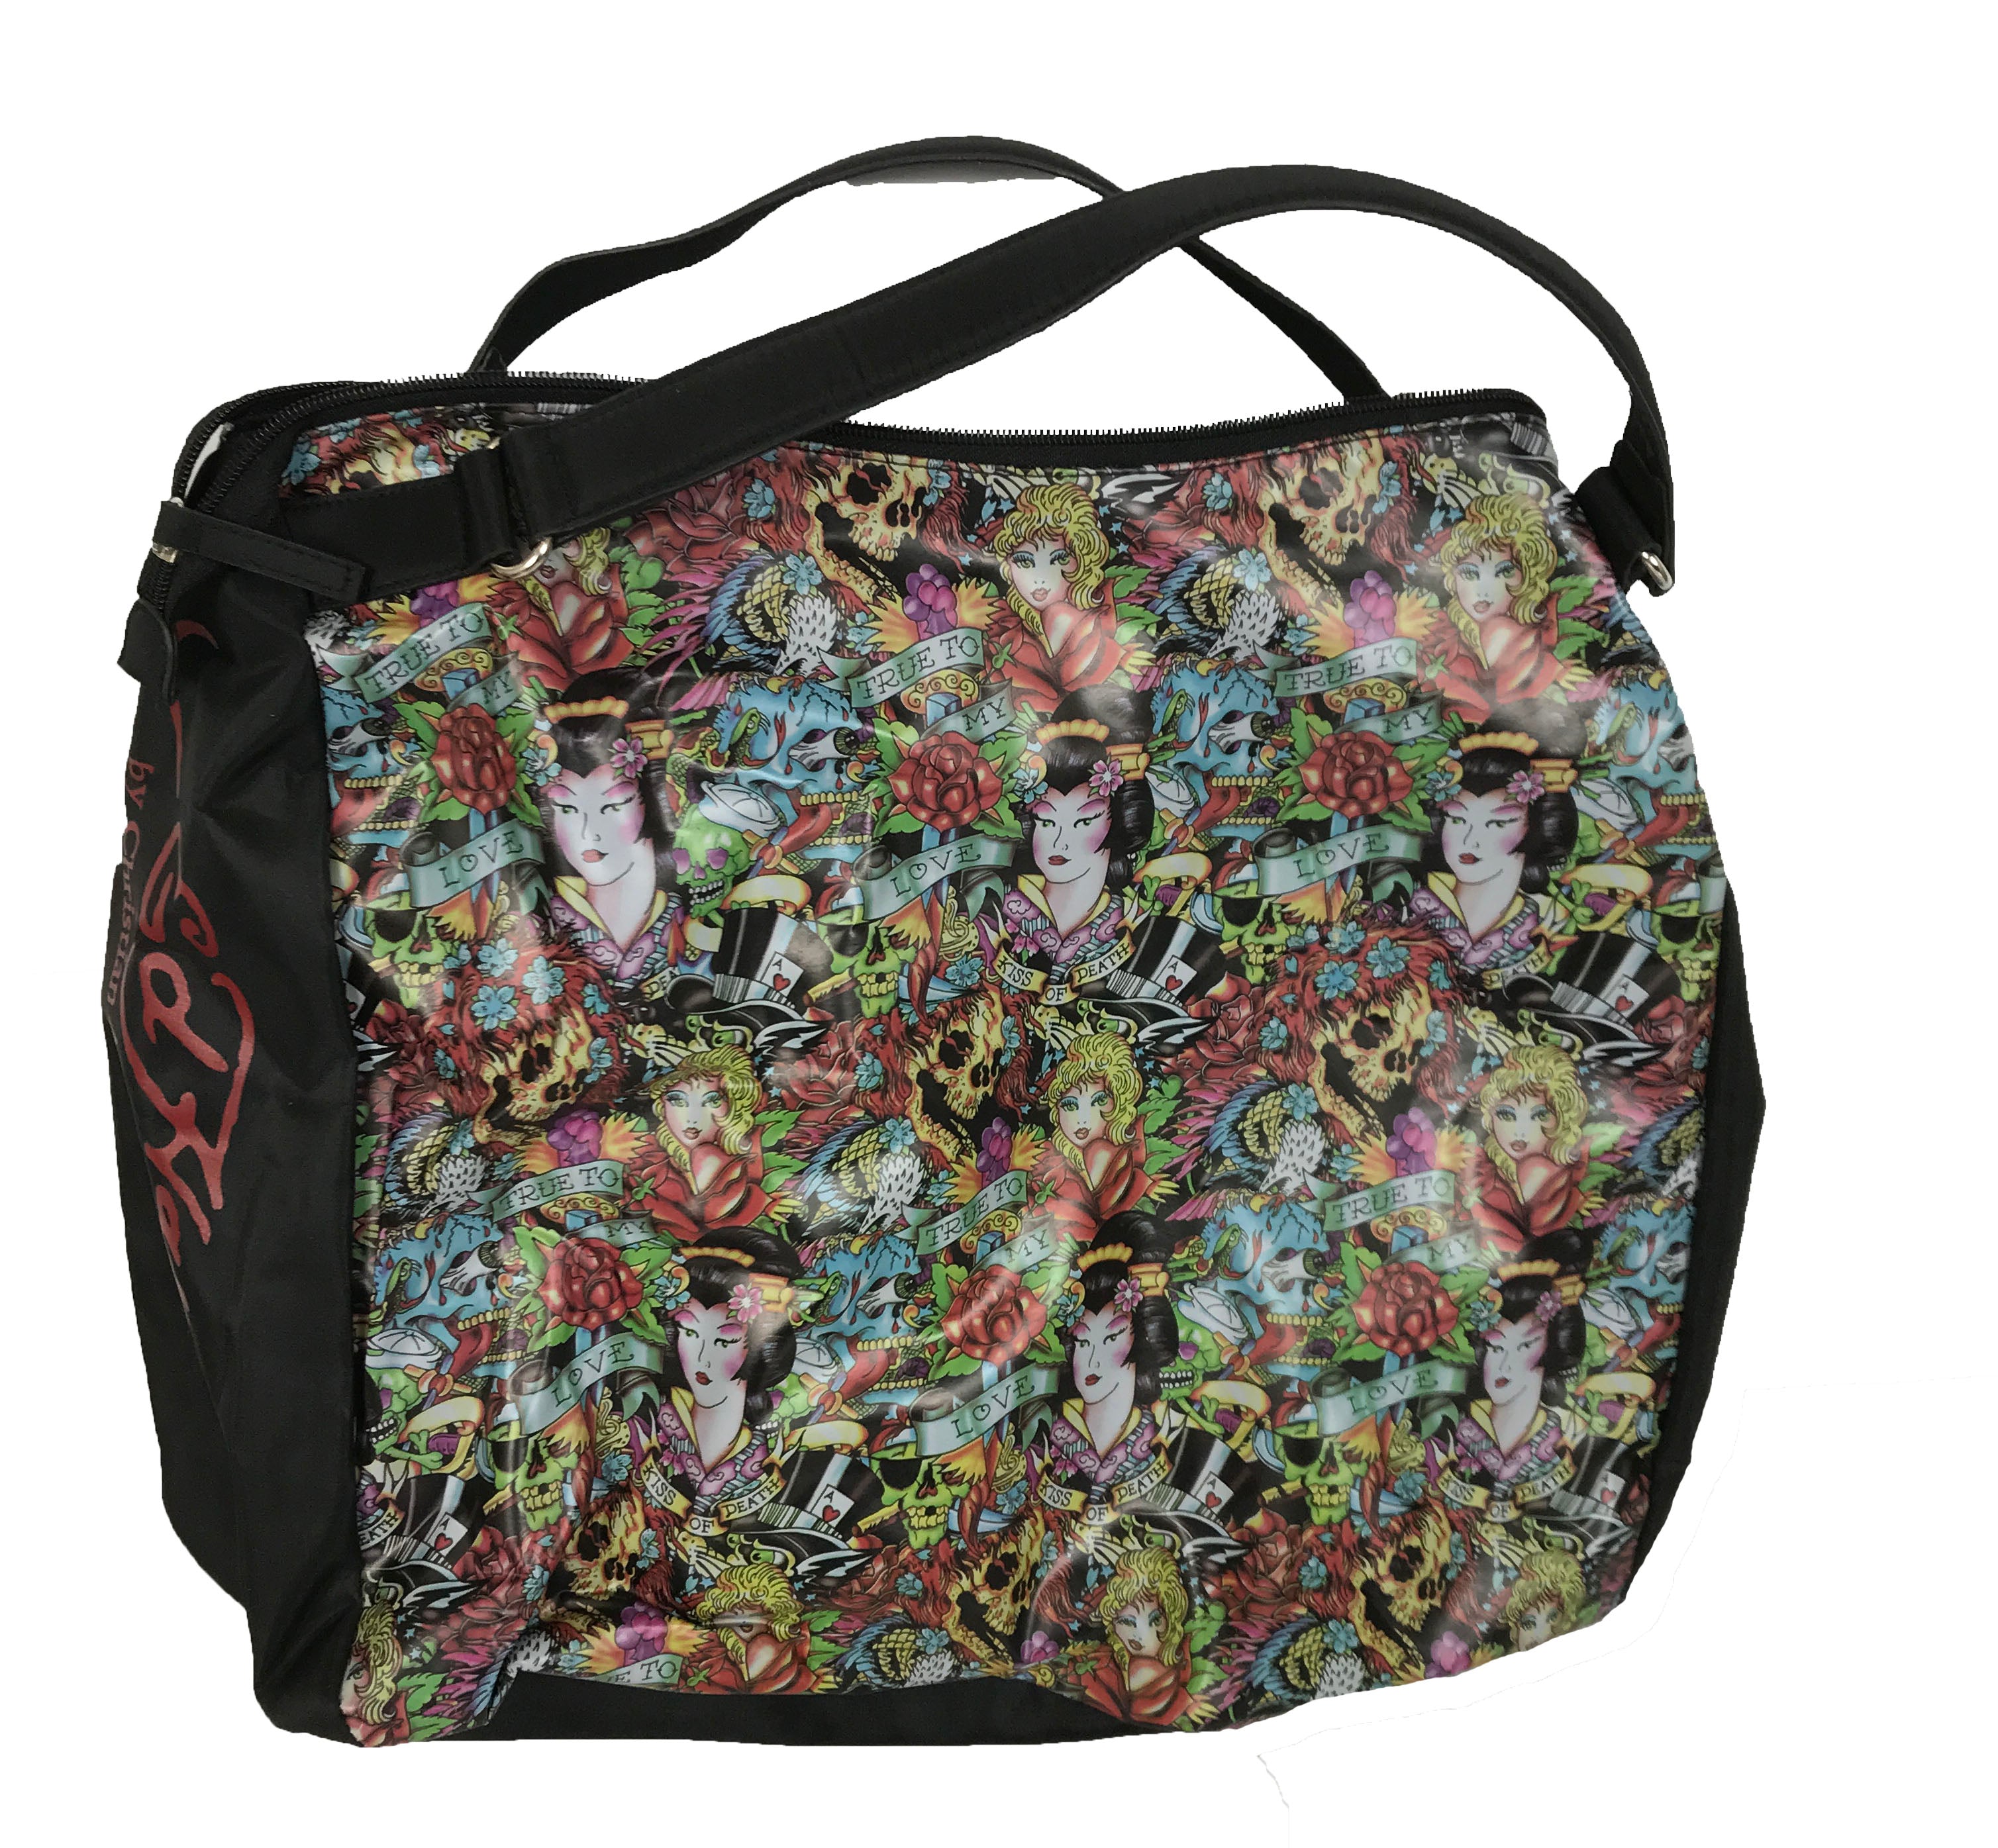 Ed Hardy by Christian Audigier Tote Bag